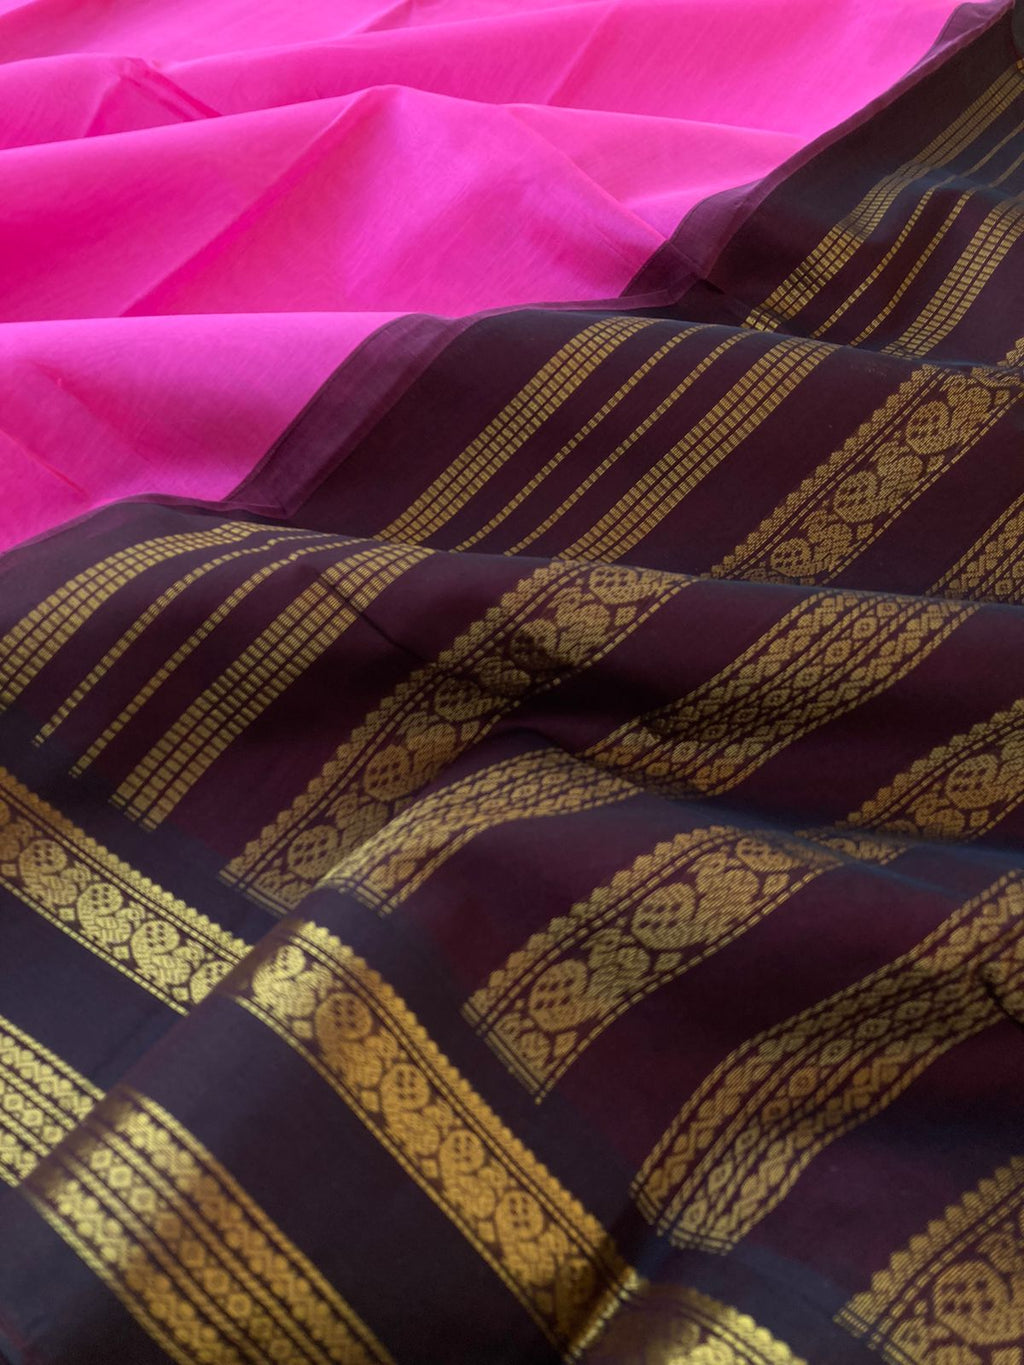 Korvai Silk Cottons - rose pink and coffee